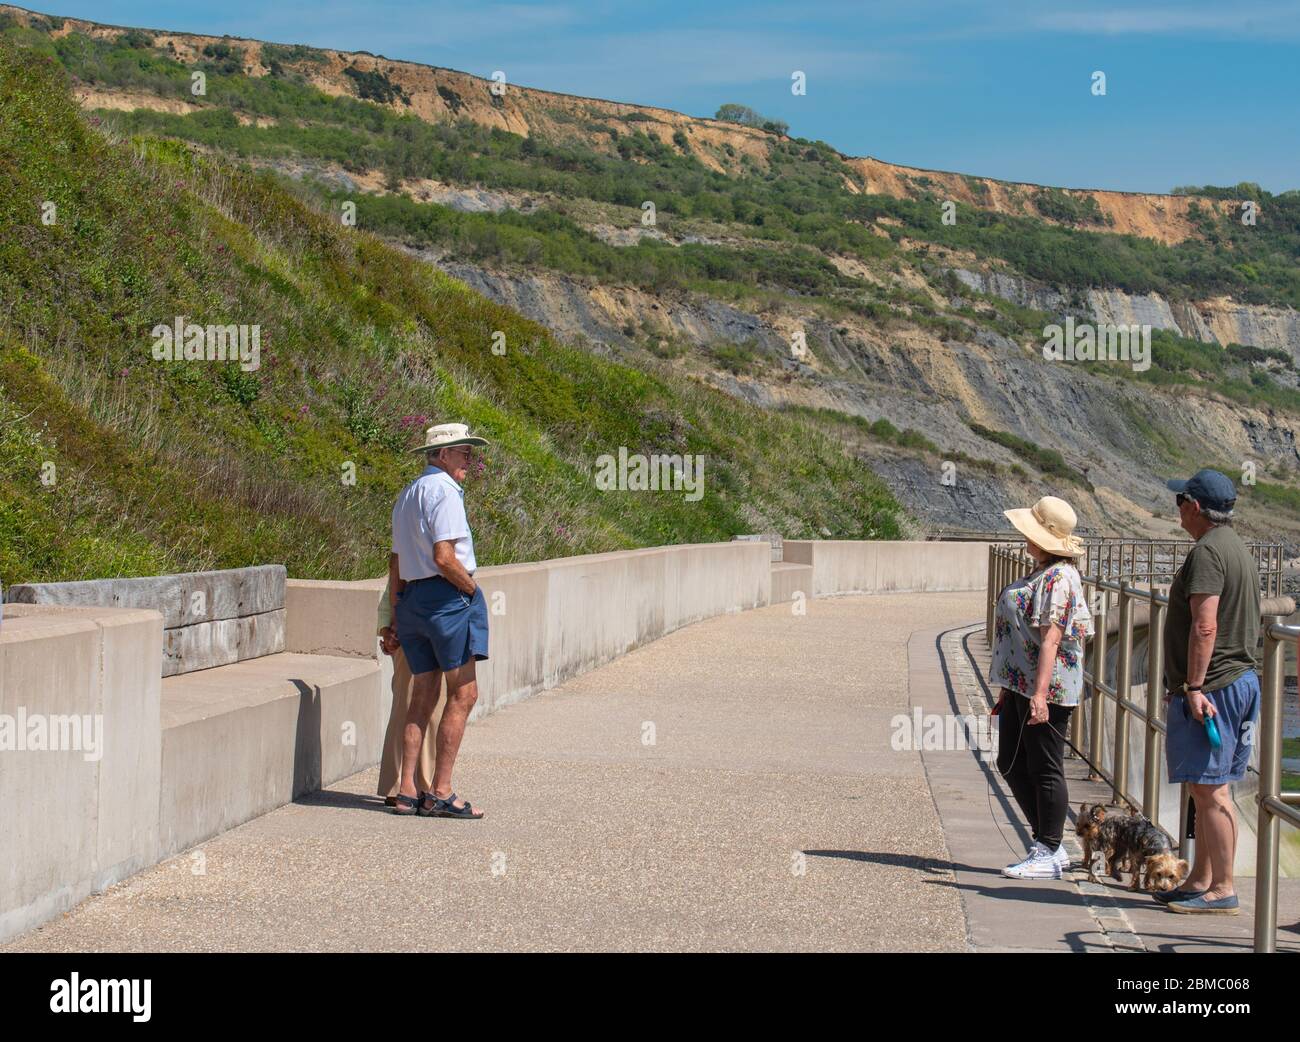 Lyme Regis Dorset, UK. 8th May 2020. UK Weather: A hot and sunny bank holiday afternoon at Lyme Regis, West Dorset.  friends stop to chat while maintaining social distancing. Credit: Celia McMahon/Alamy Live News. Stock Photo